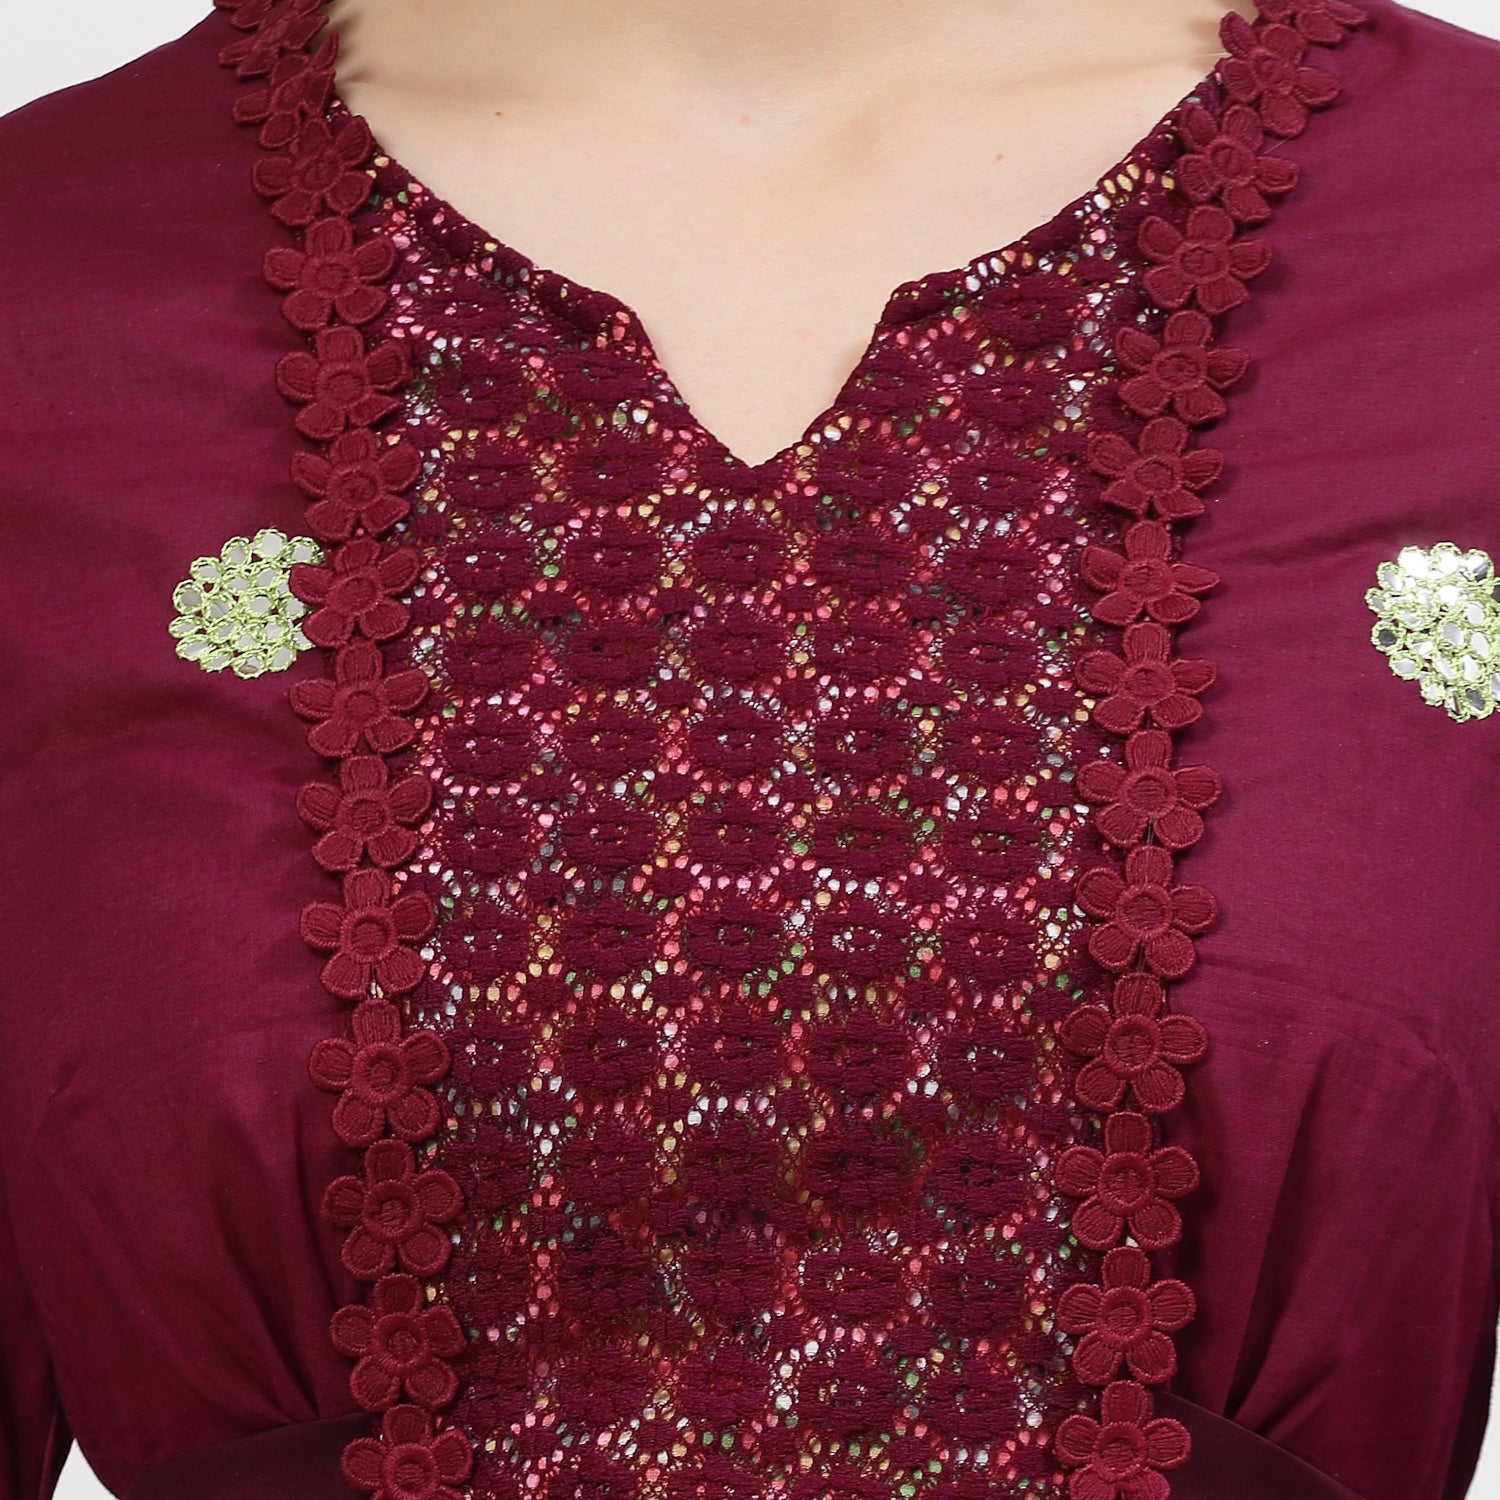 Purple Cotton Mirror Embroidery Top With Flower Net Lace At Yoke